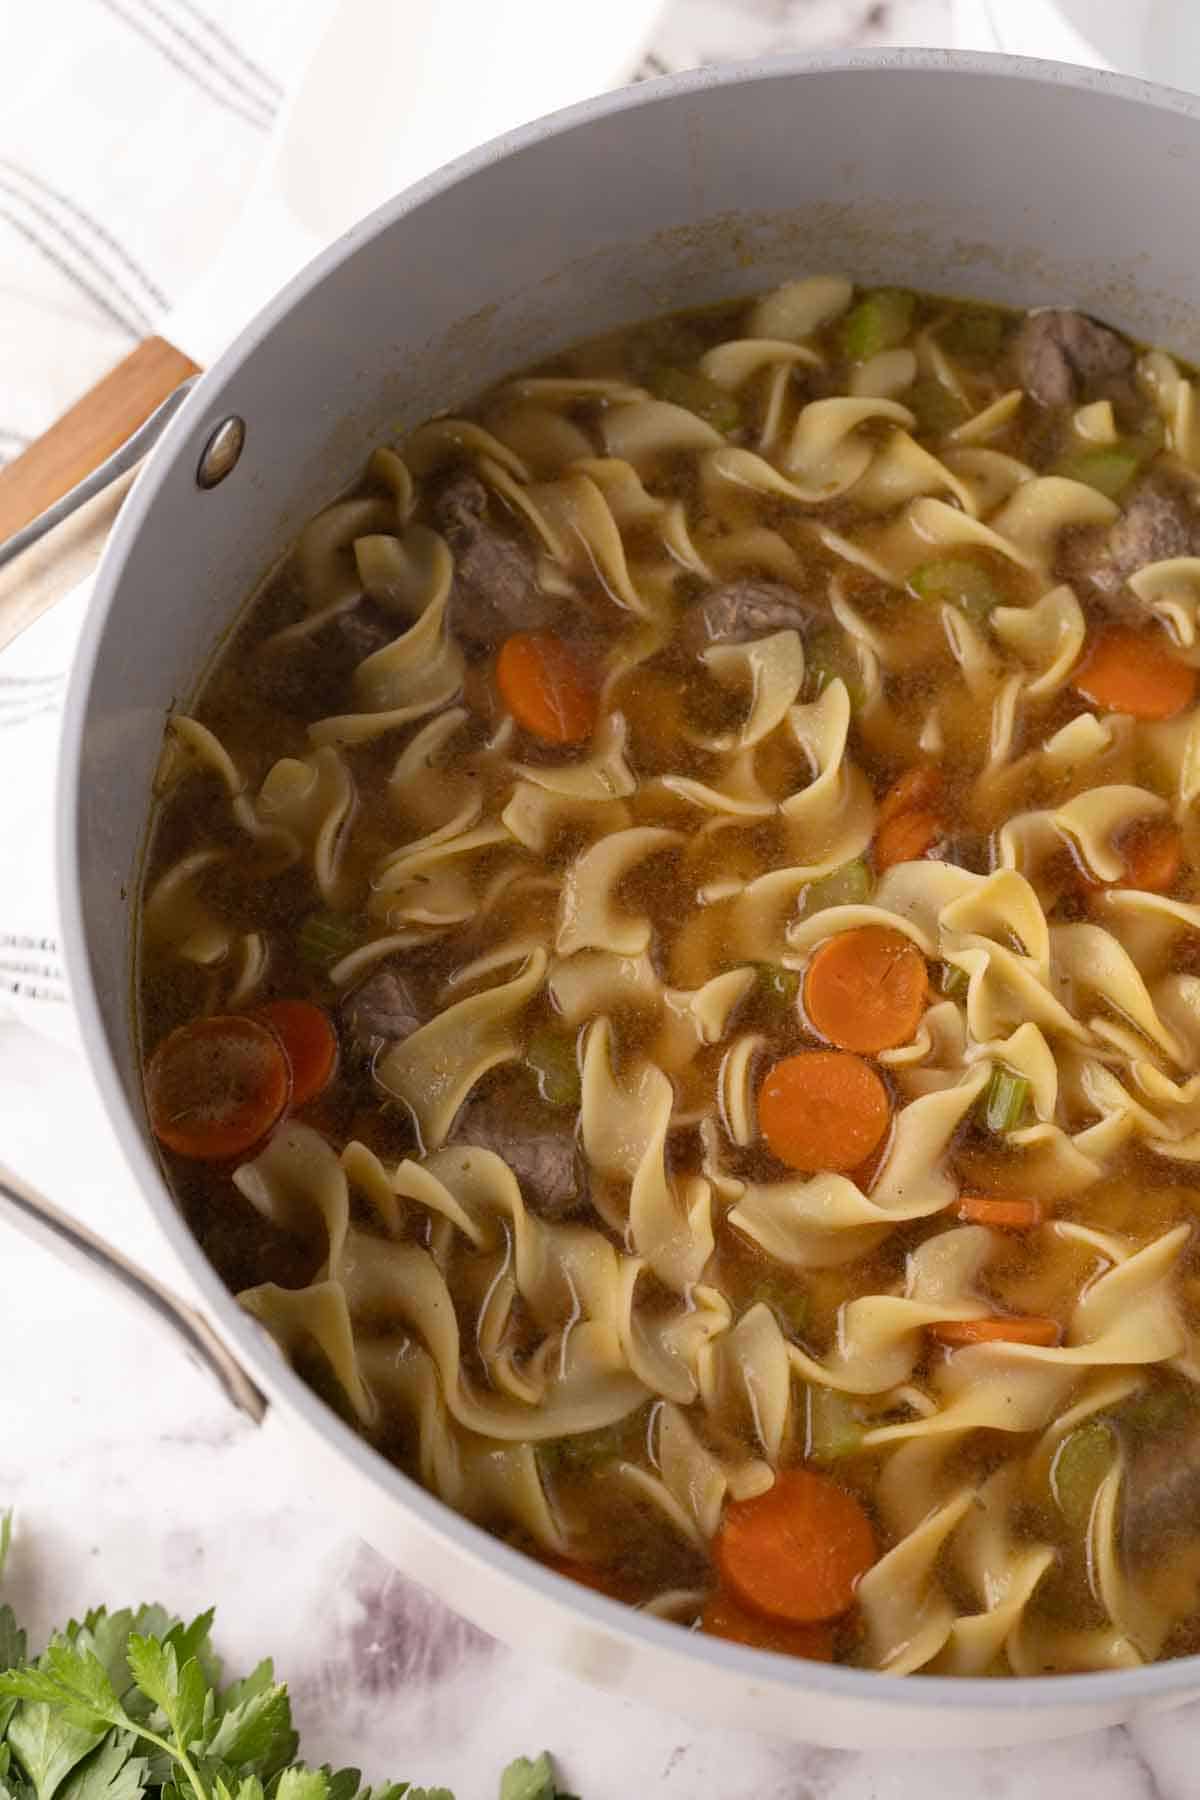 beef noodle soup recipe in a large pot.